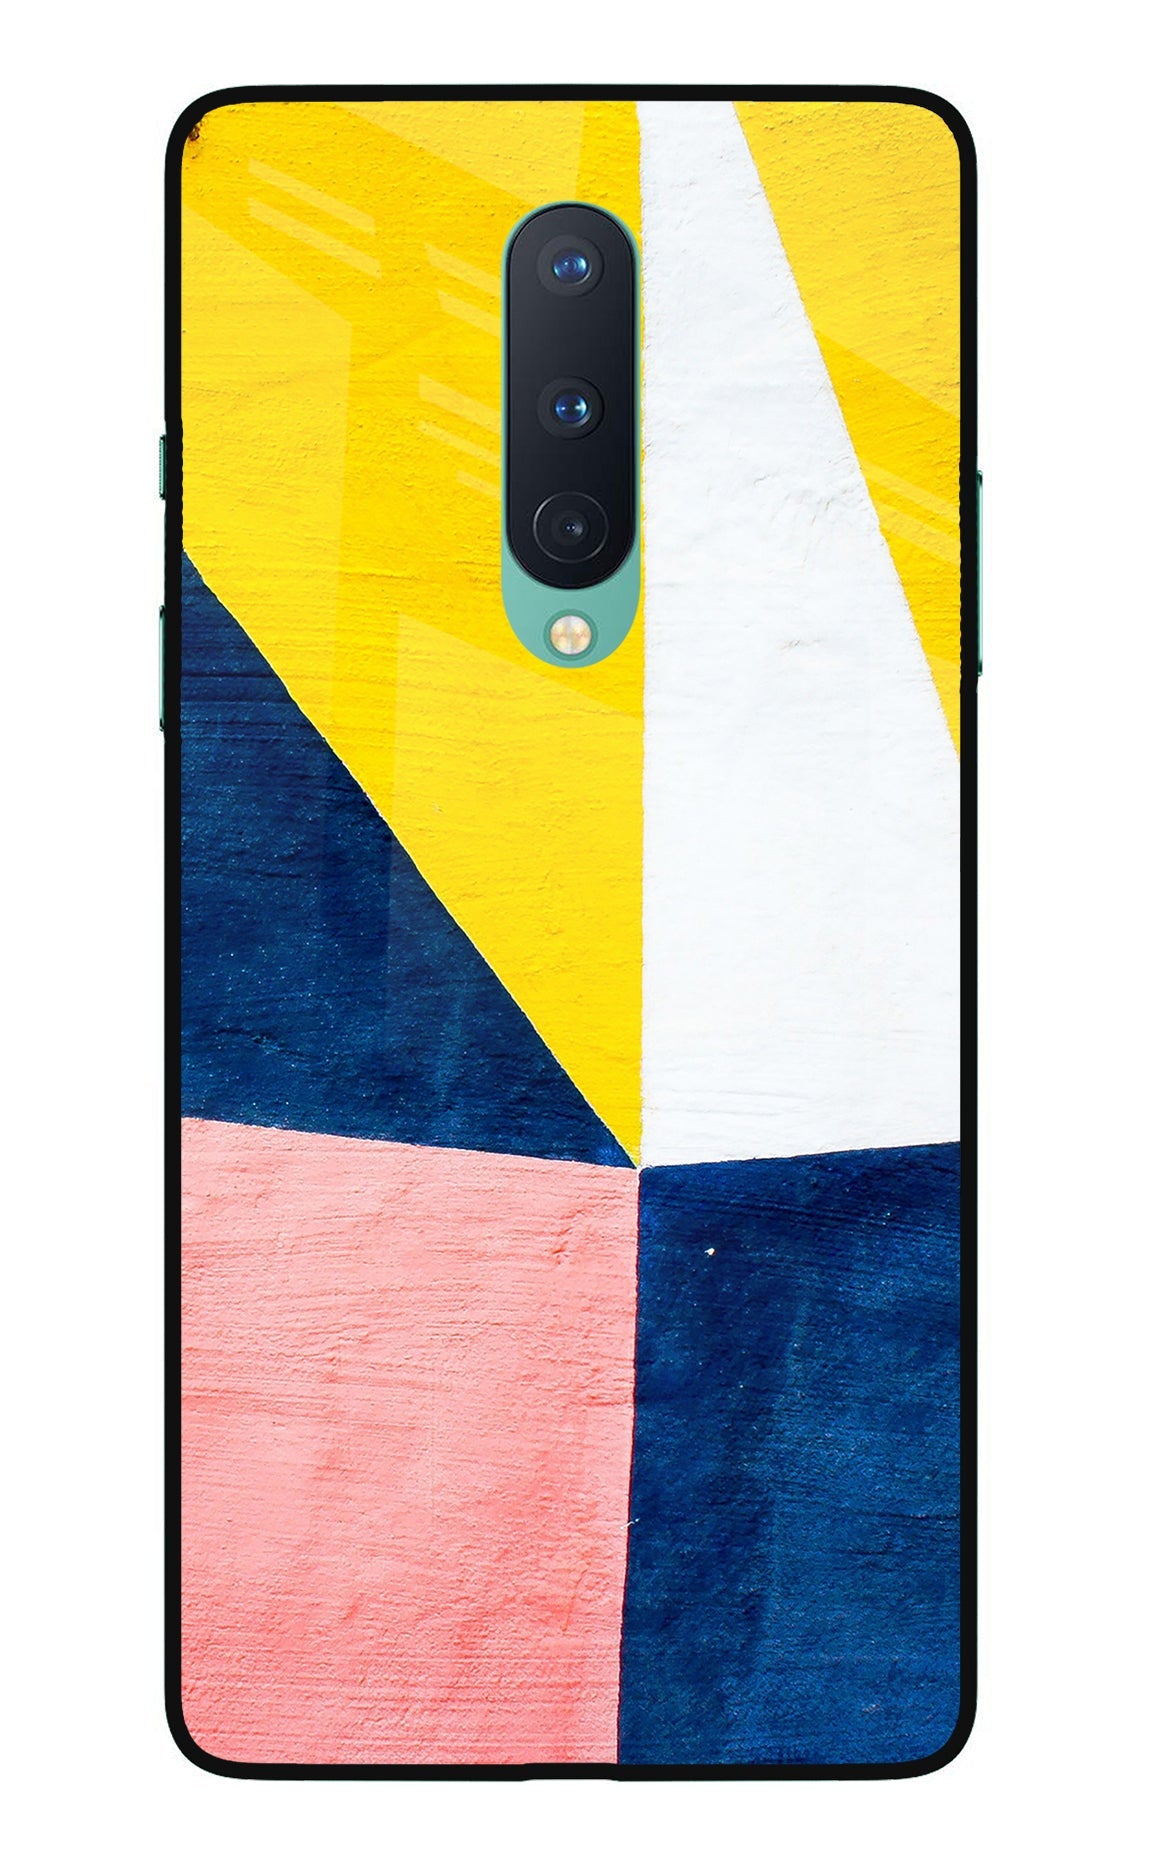 Colourful Art Oneplus 8 Glass Case